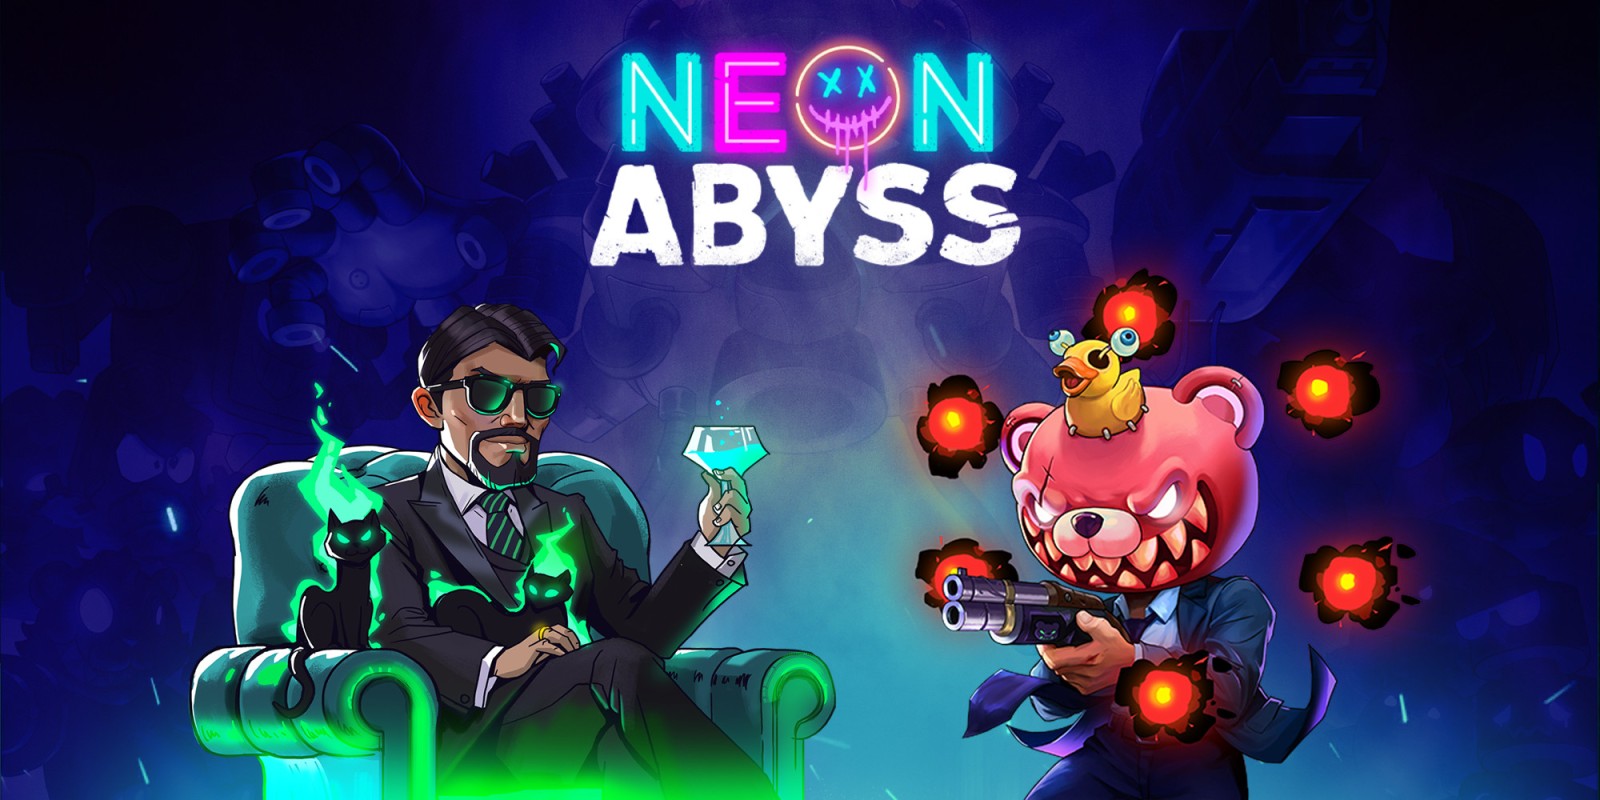 H2x1_NSwitchDS_NeonAbyss_image1600w.jpg